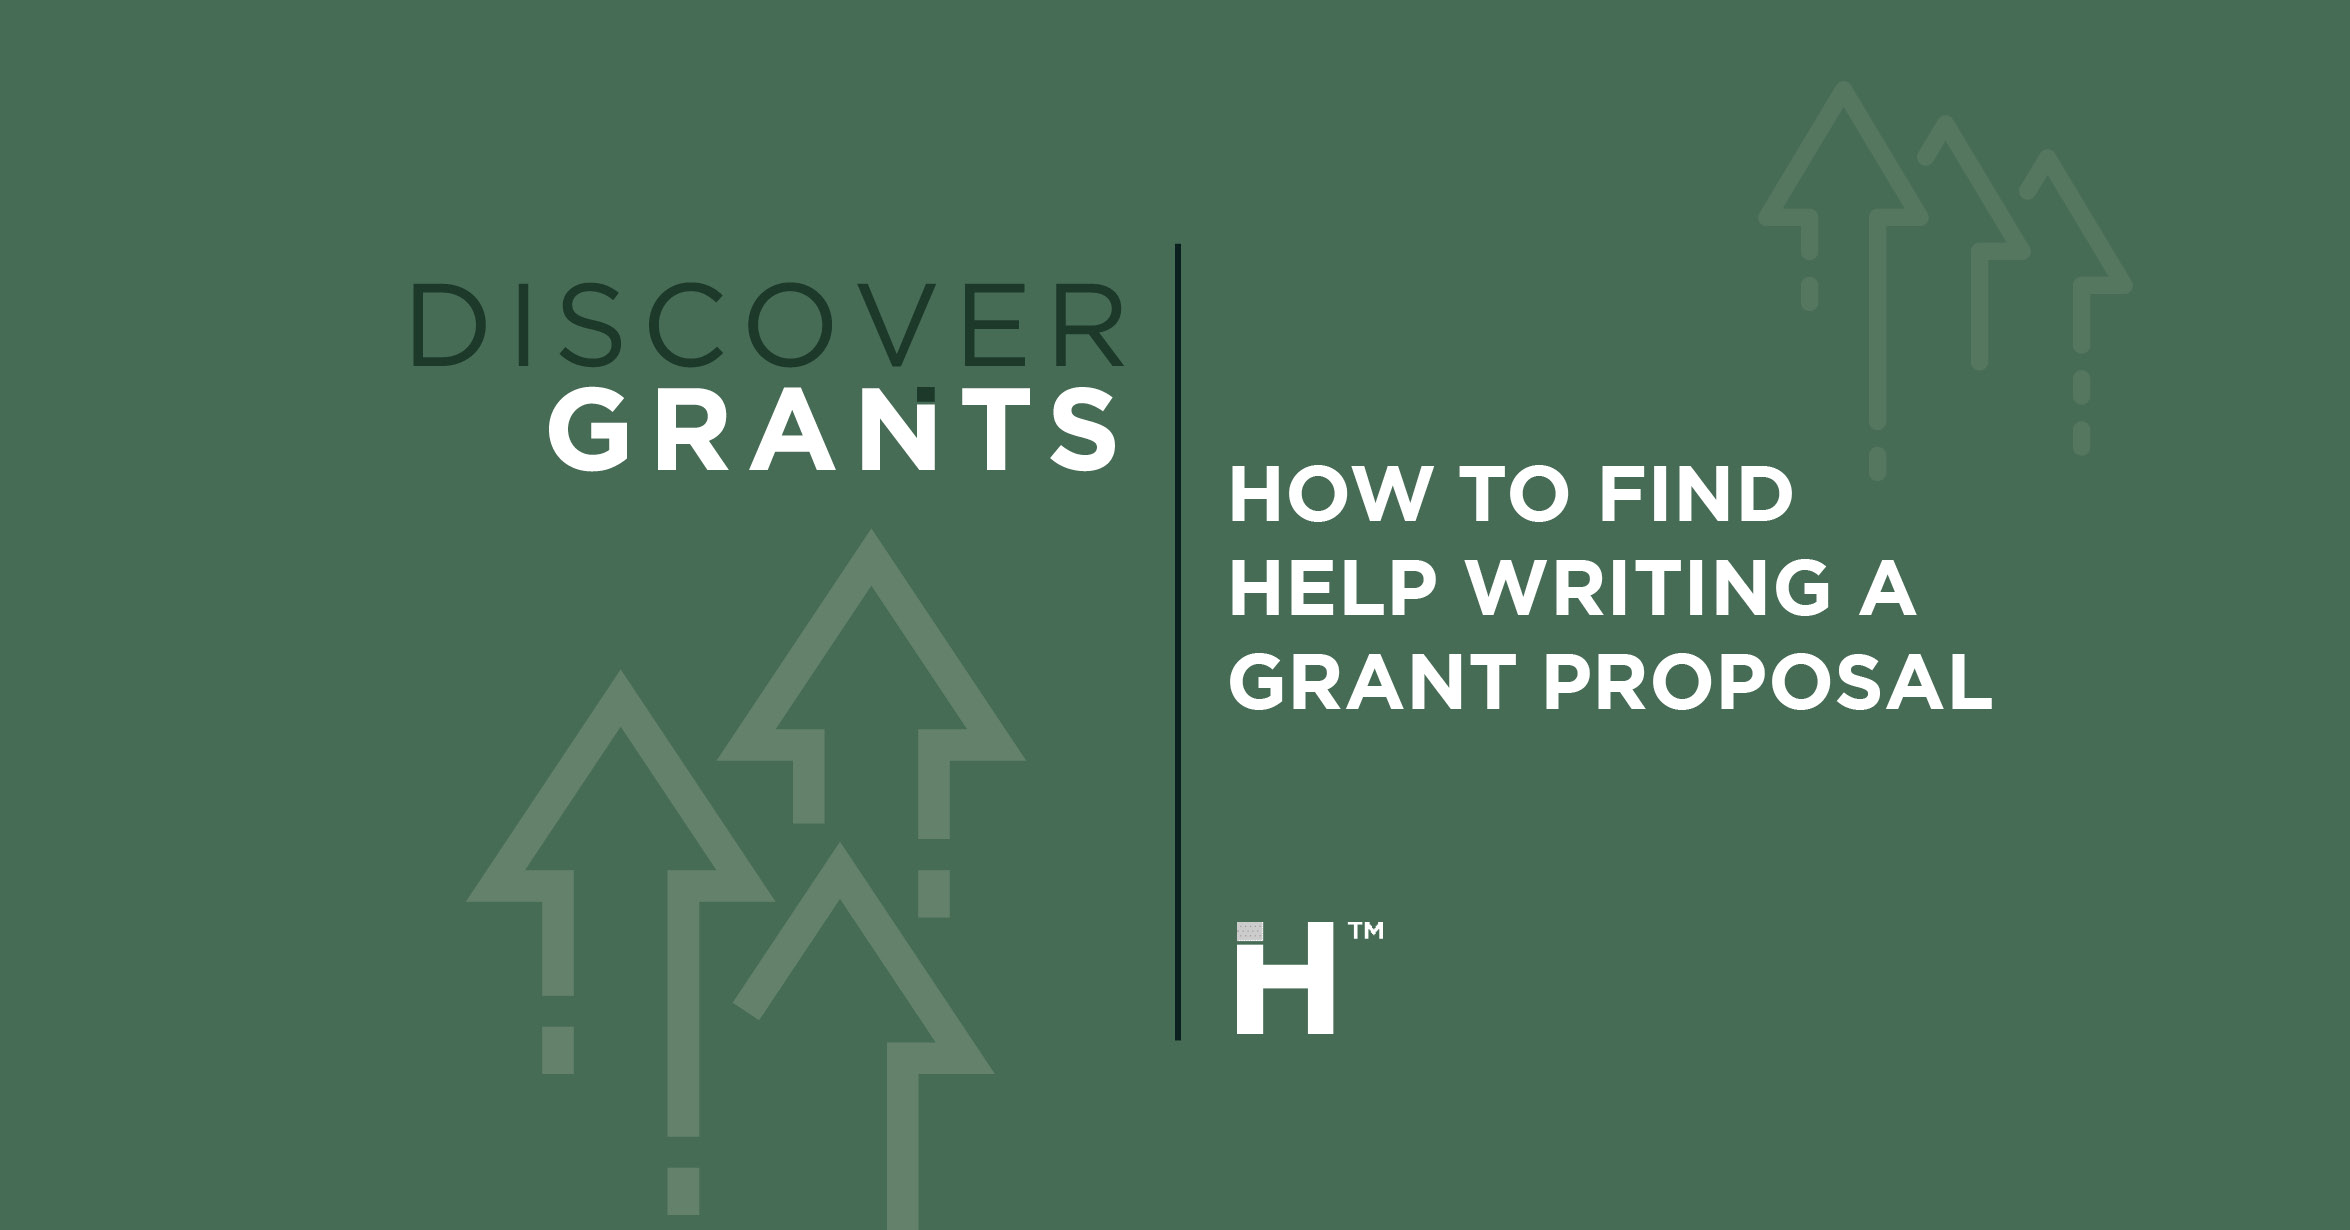 help writing a grant proposal